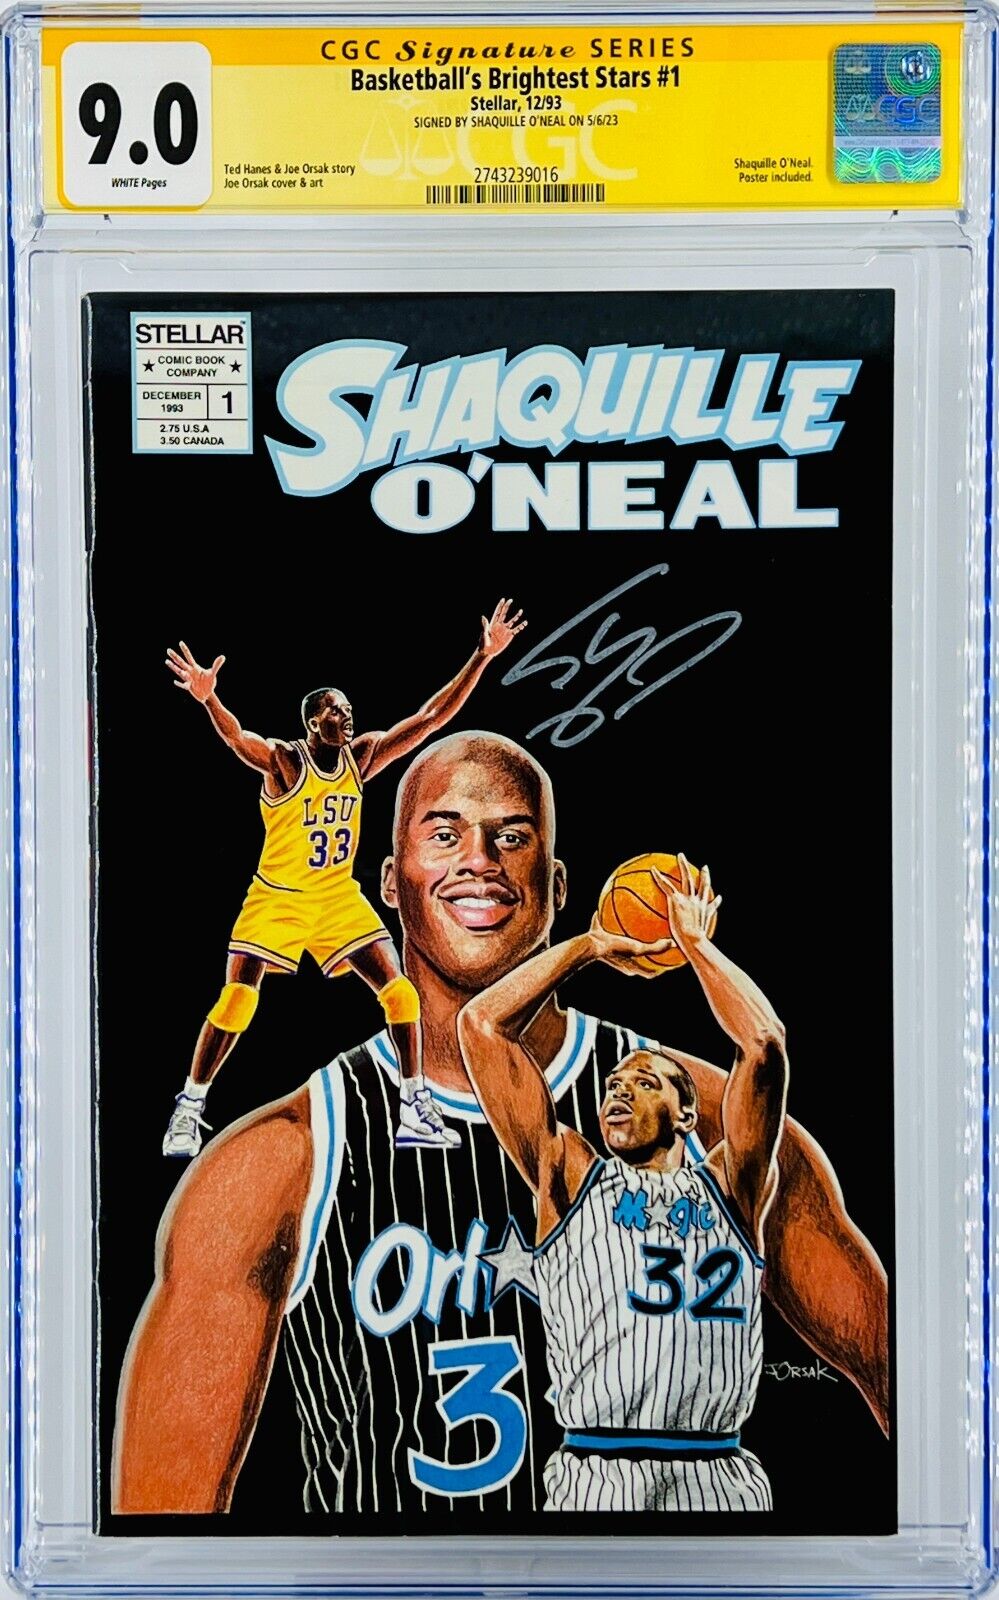 Shaquille O'Neal Signed CGC SS Basketball's Brightest Stars #1 Grade 9.0